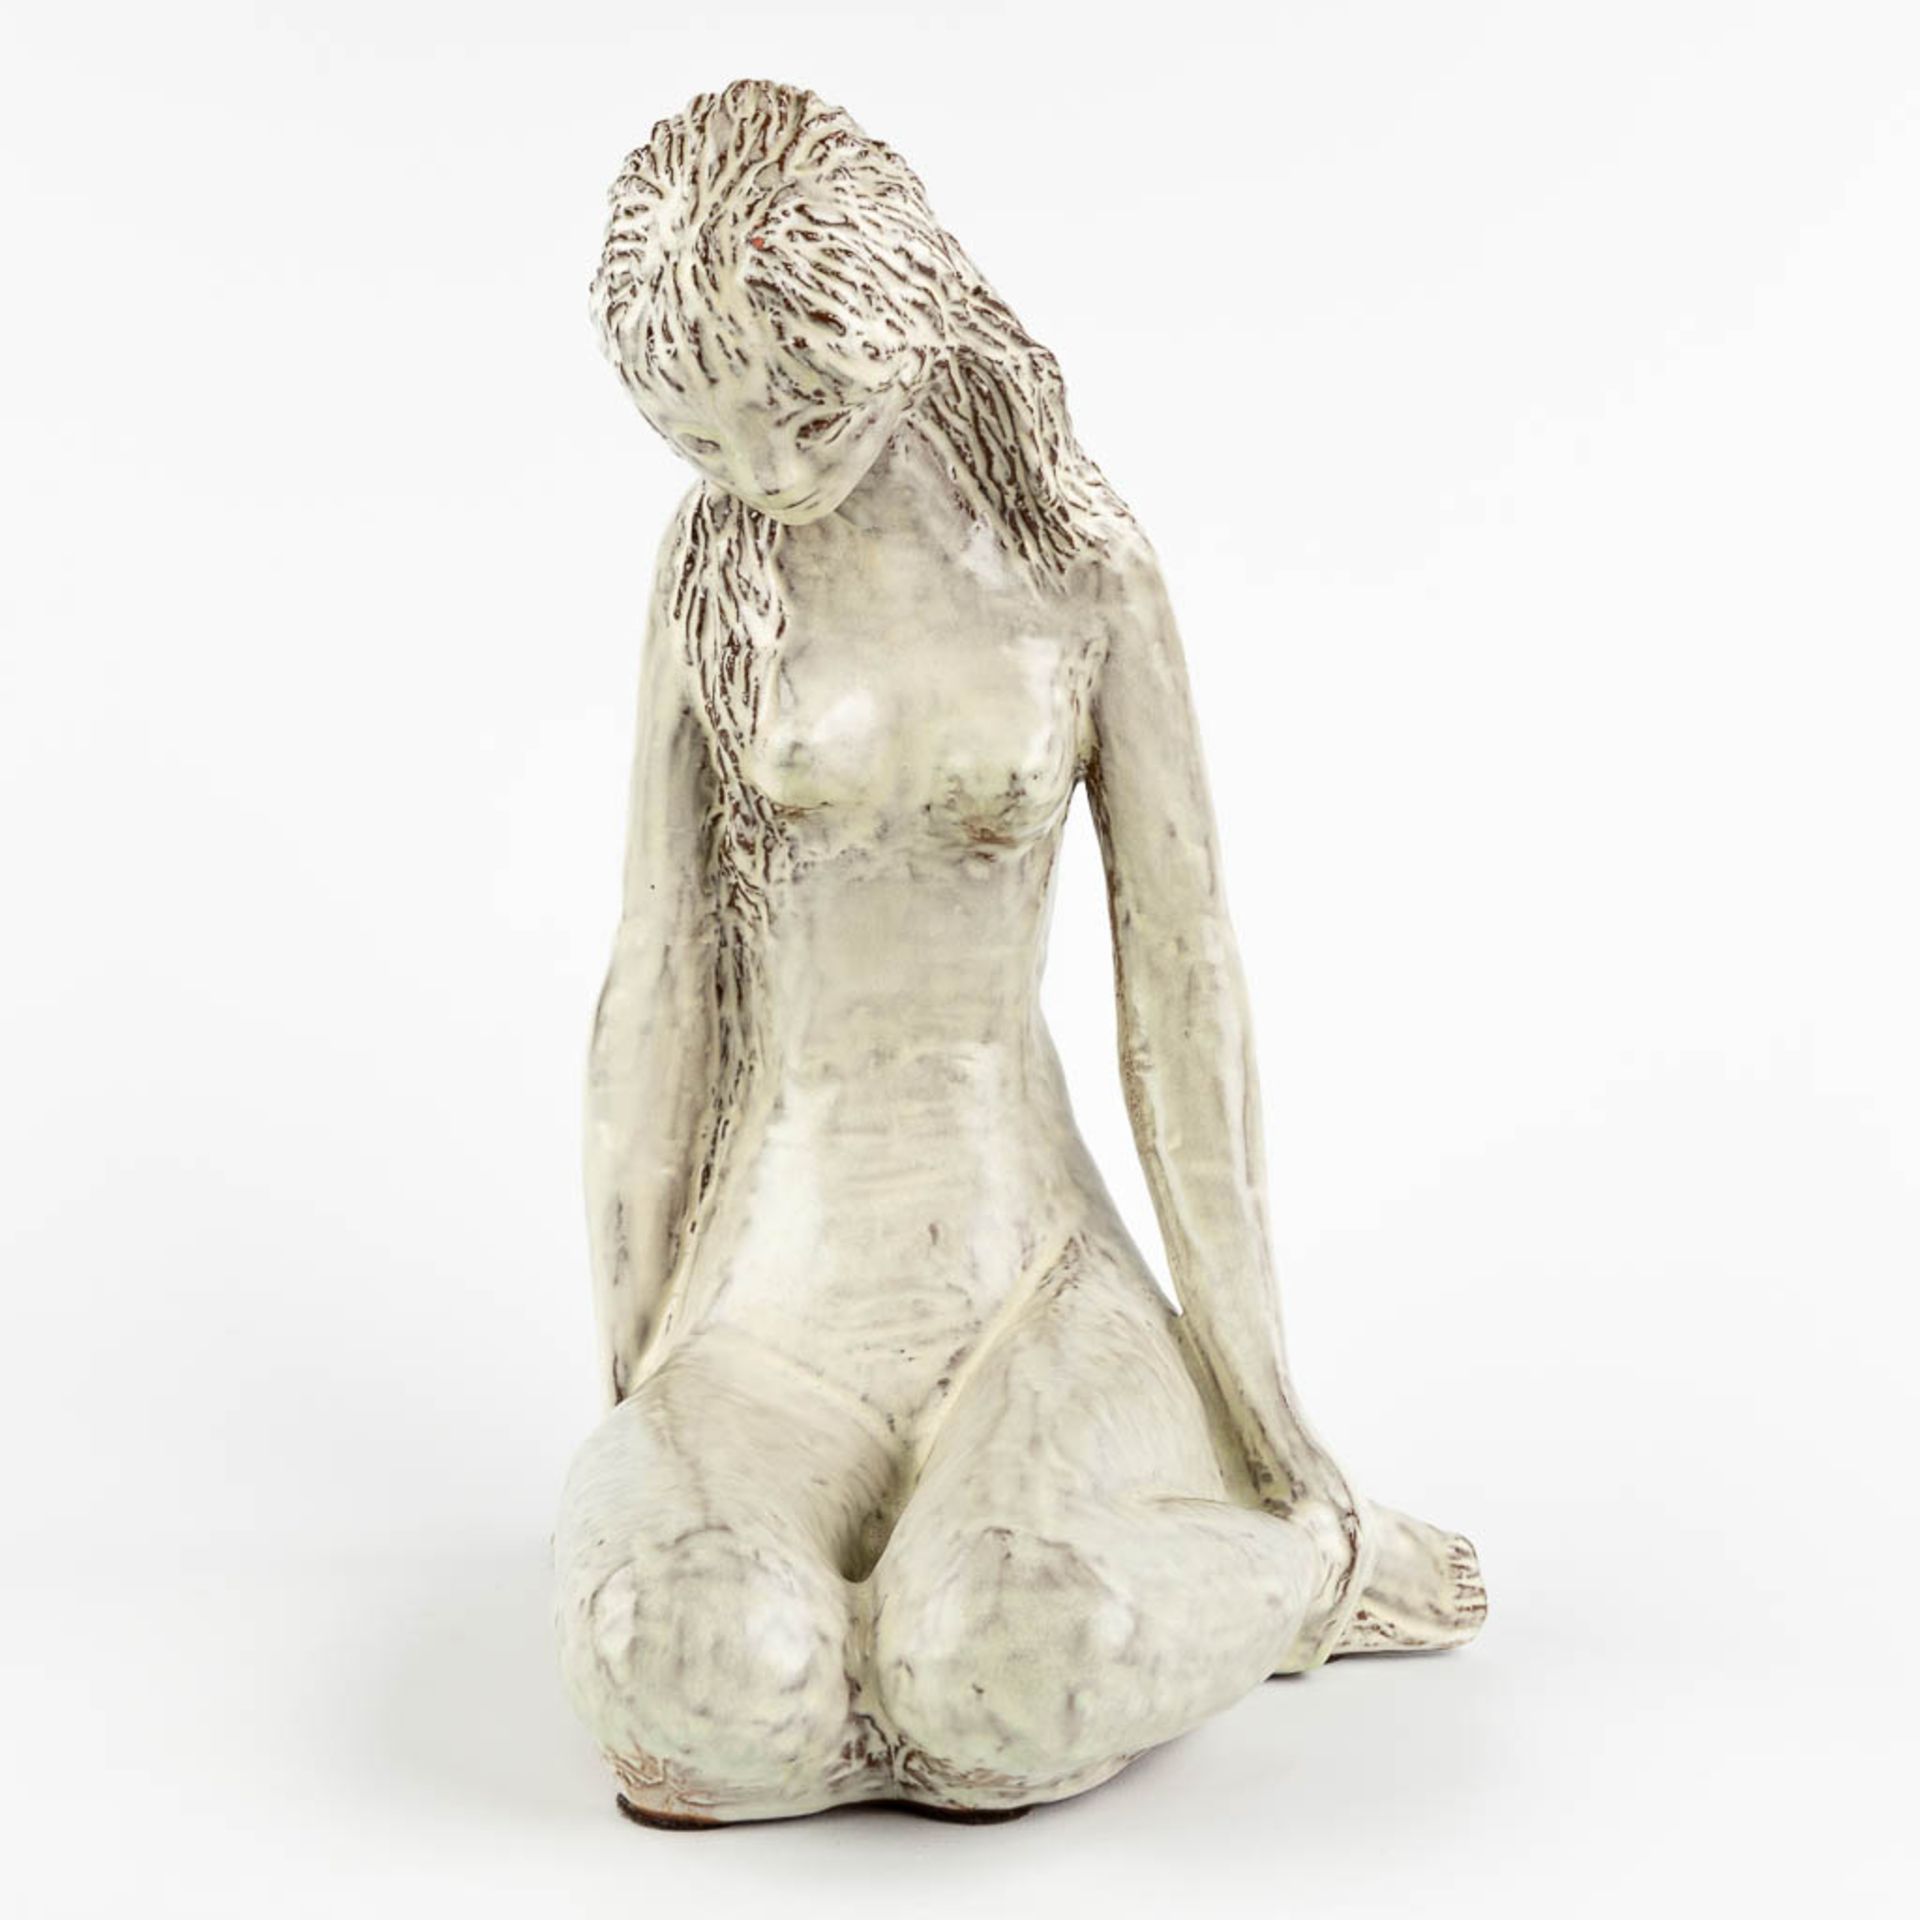 Elie VAN DAMME (1928) 'Seated Lady' for Amphora. (D:25 x W:24 x H:33 cm) - Image 3 of 11